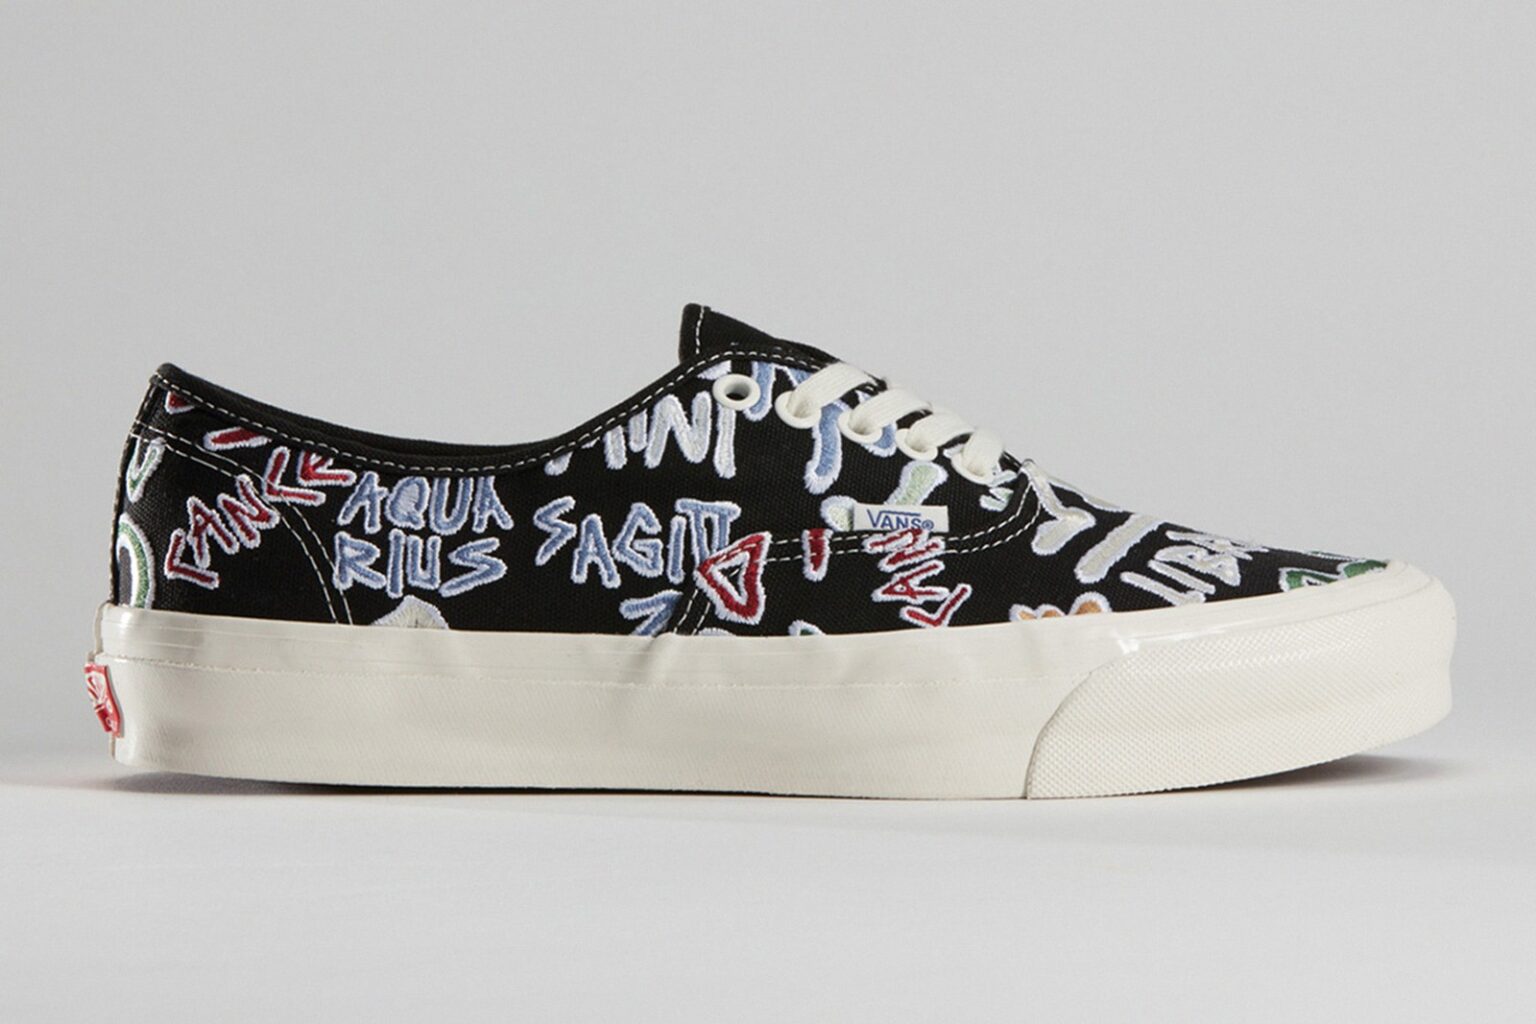 vans-og-authentic-lx-zodiac-release-date-price-02-1536x1024